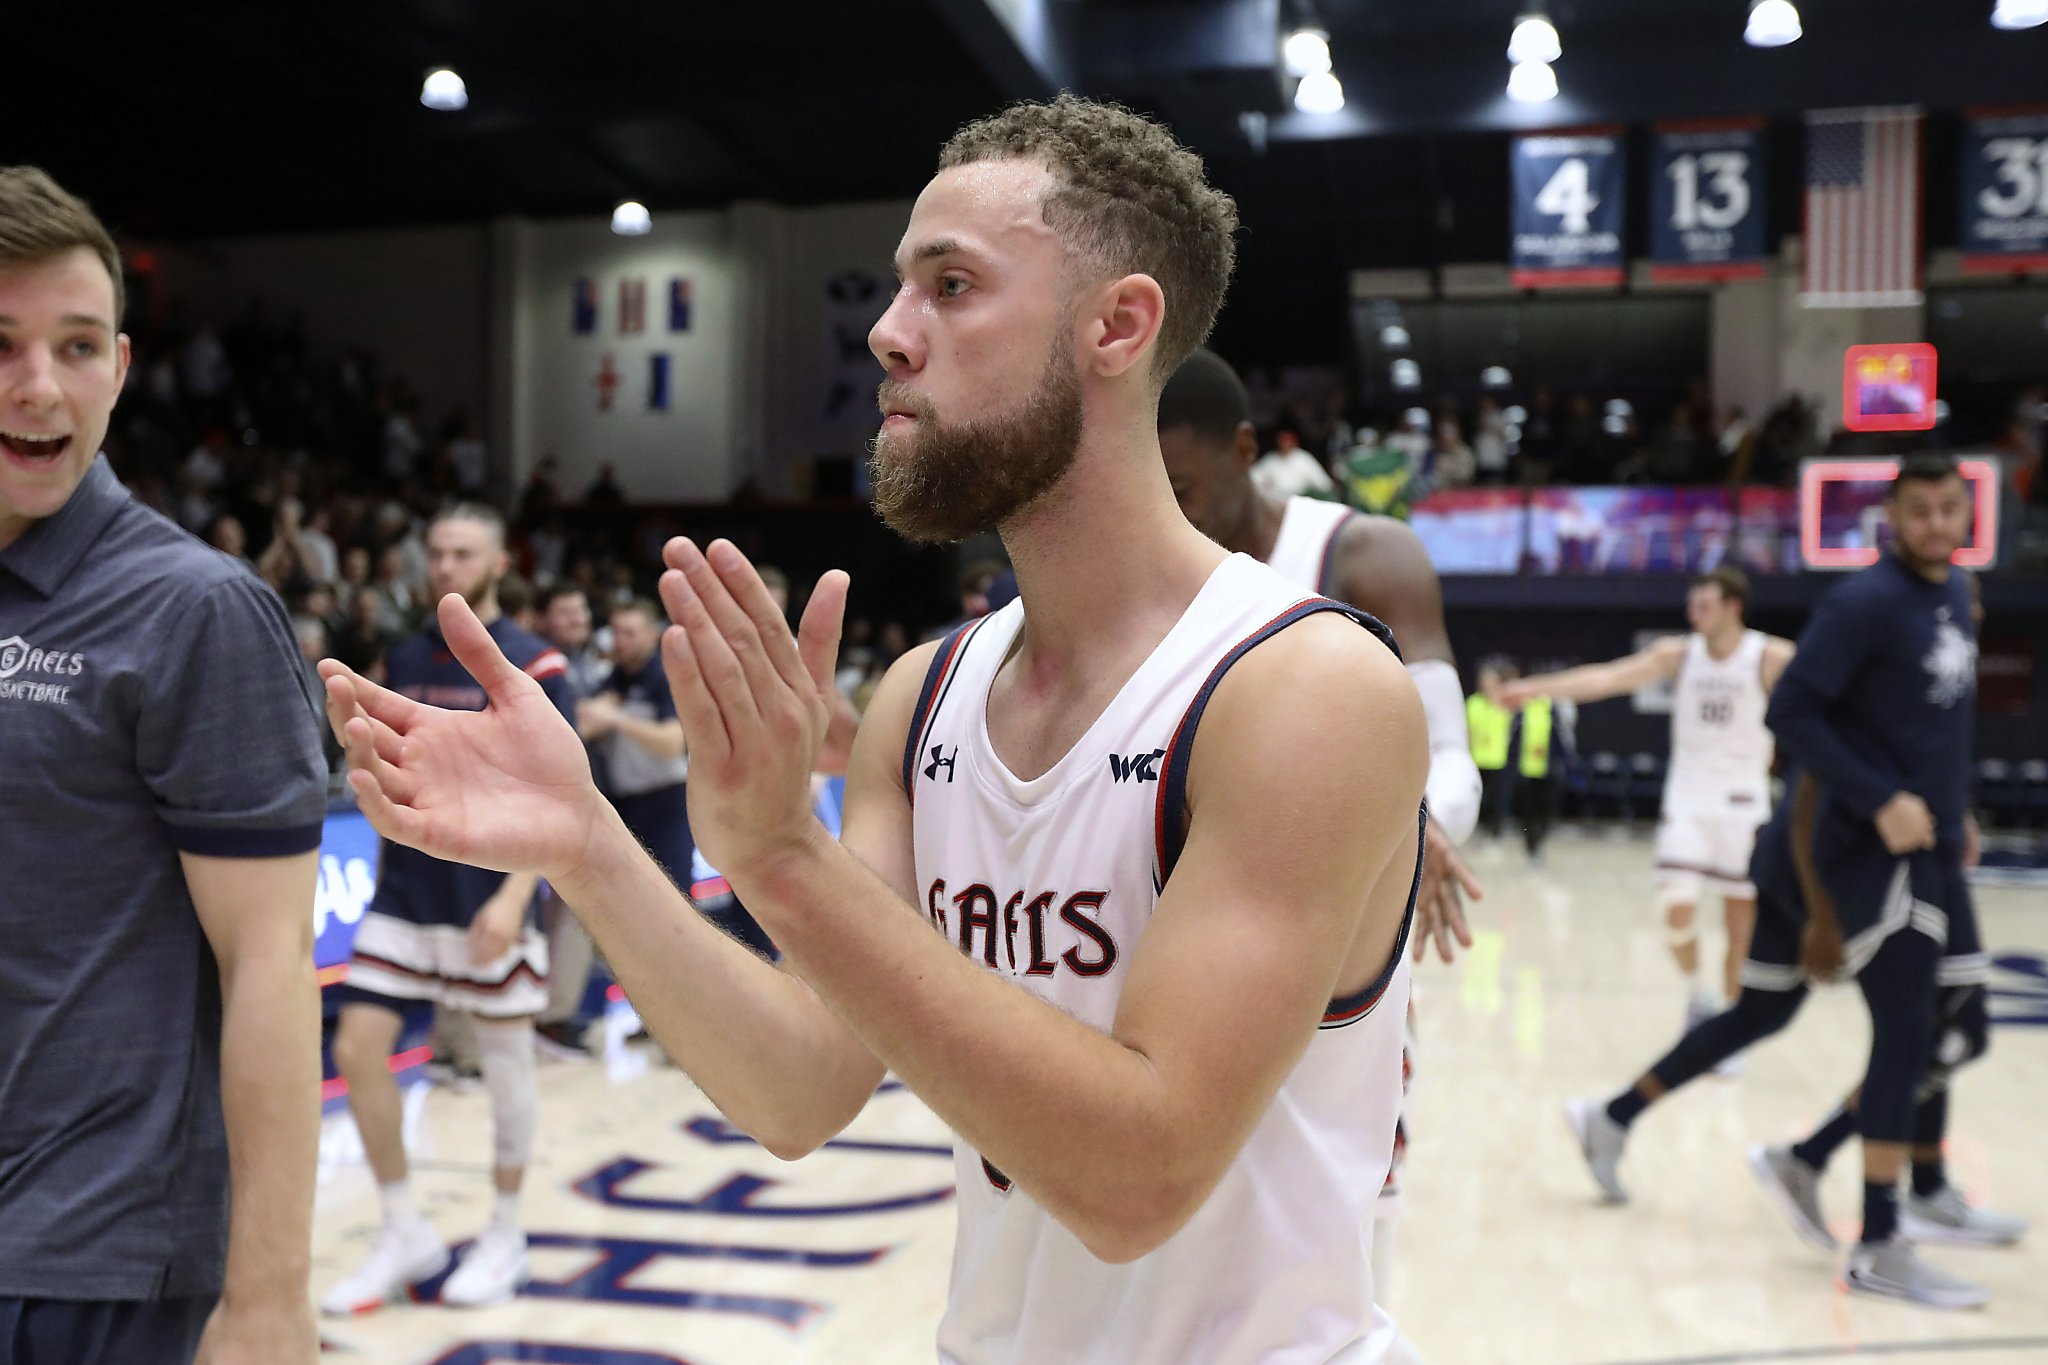 Jordan Ford was named to the - Saint Mary's College Gaels